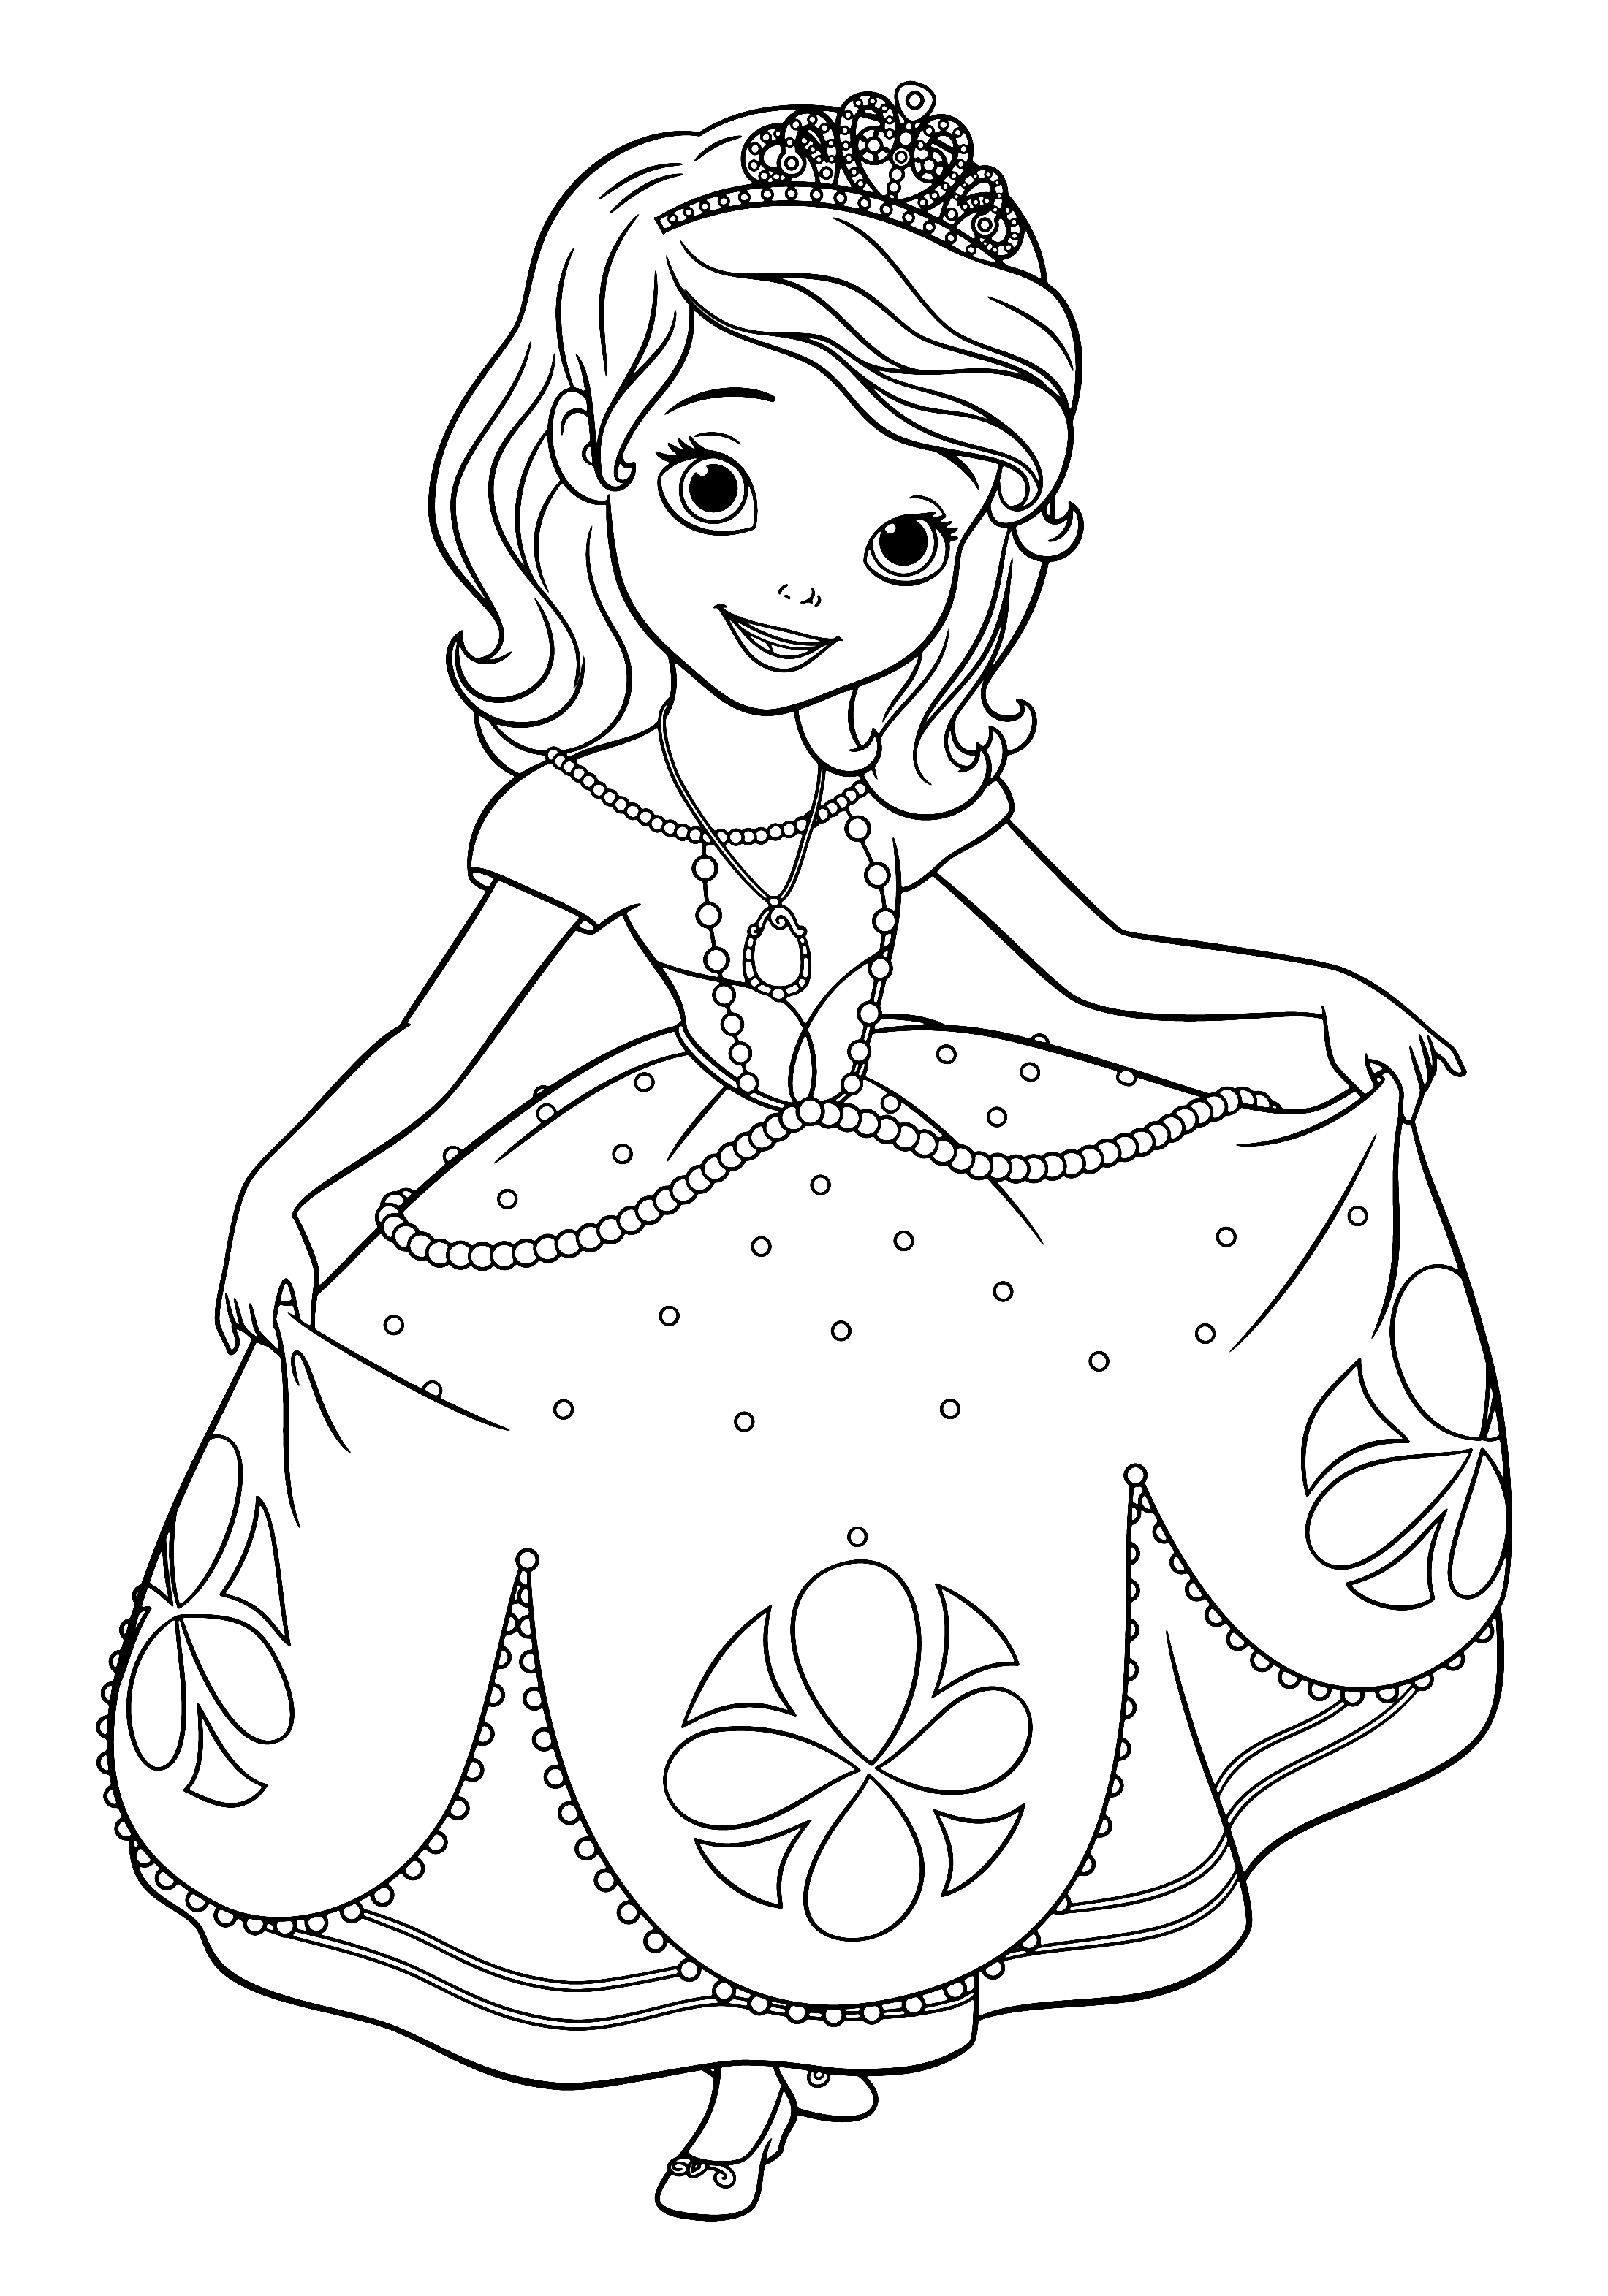 Printable Cute Sofia the First Coloring Pages